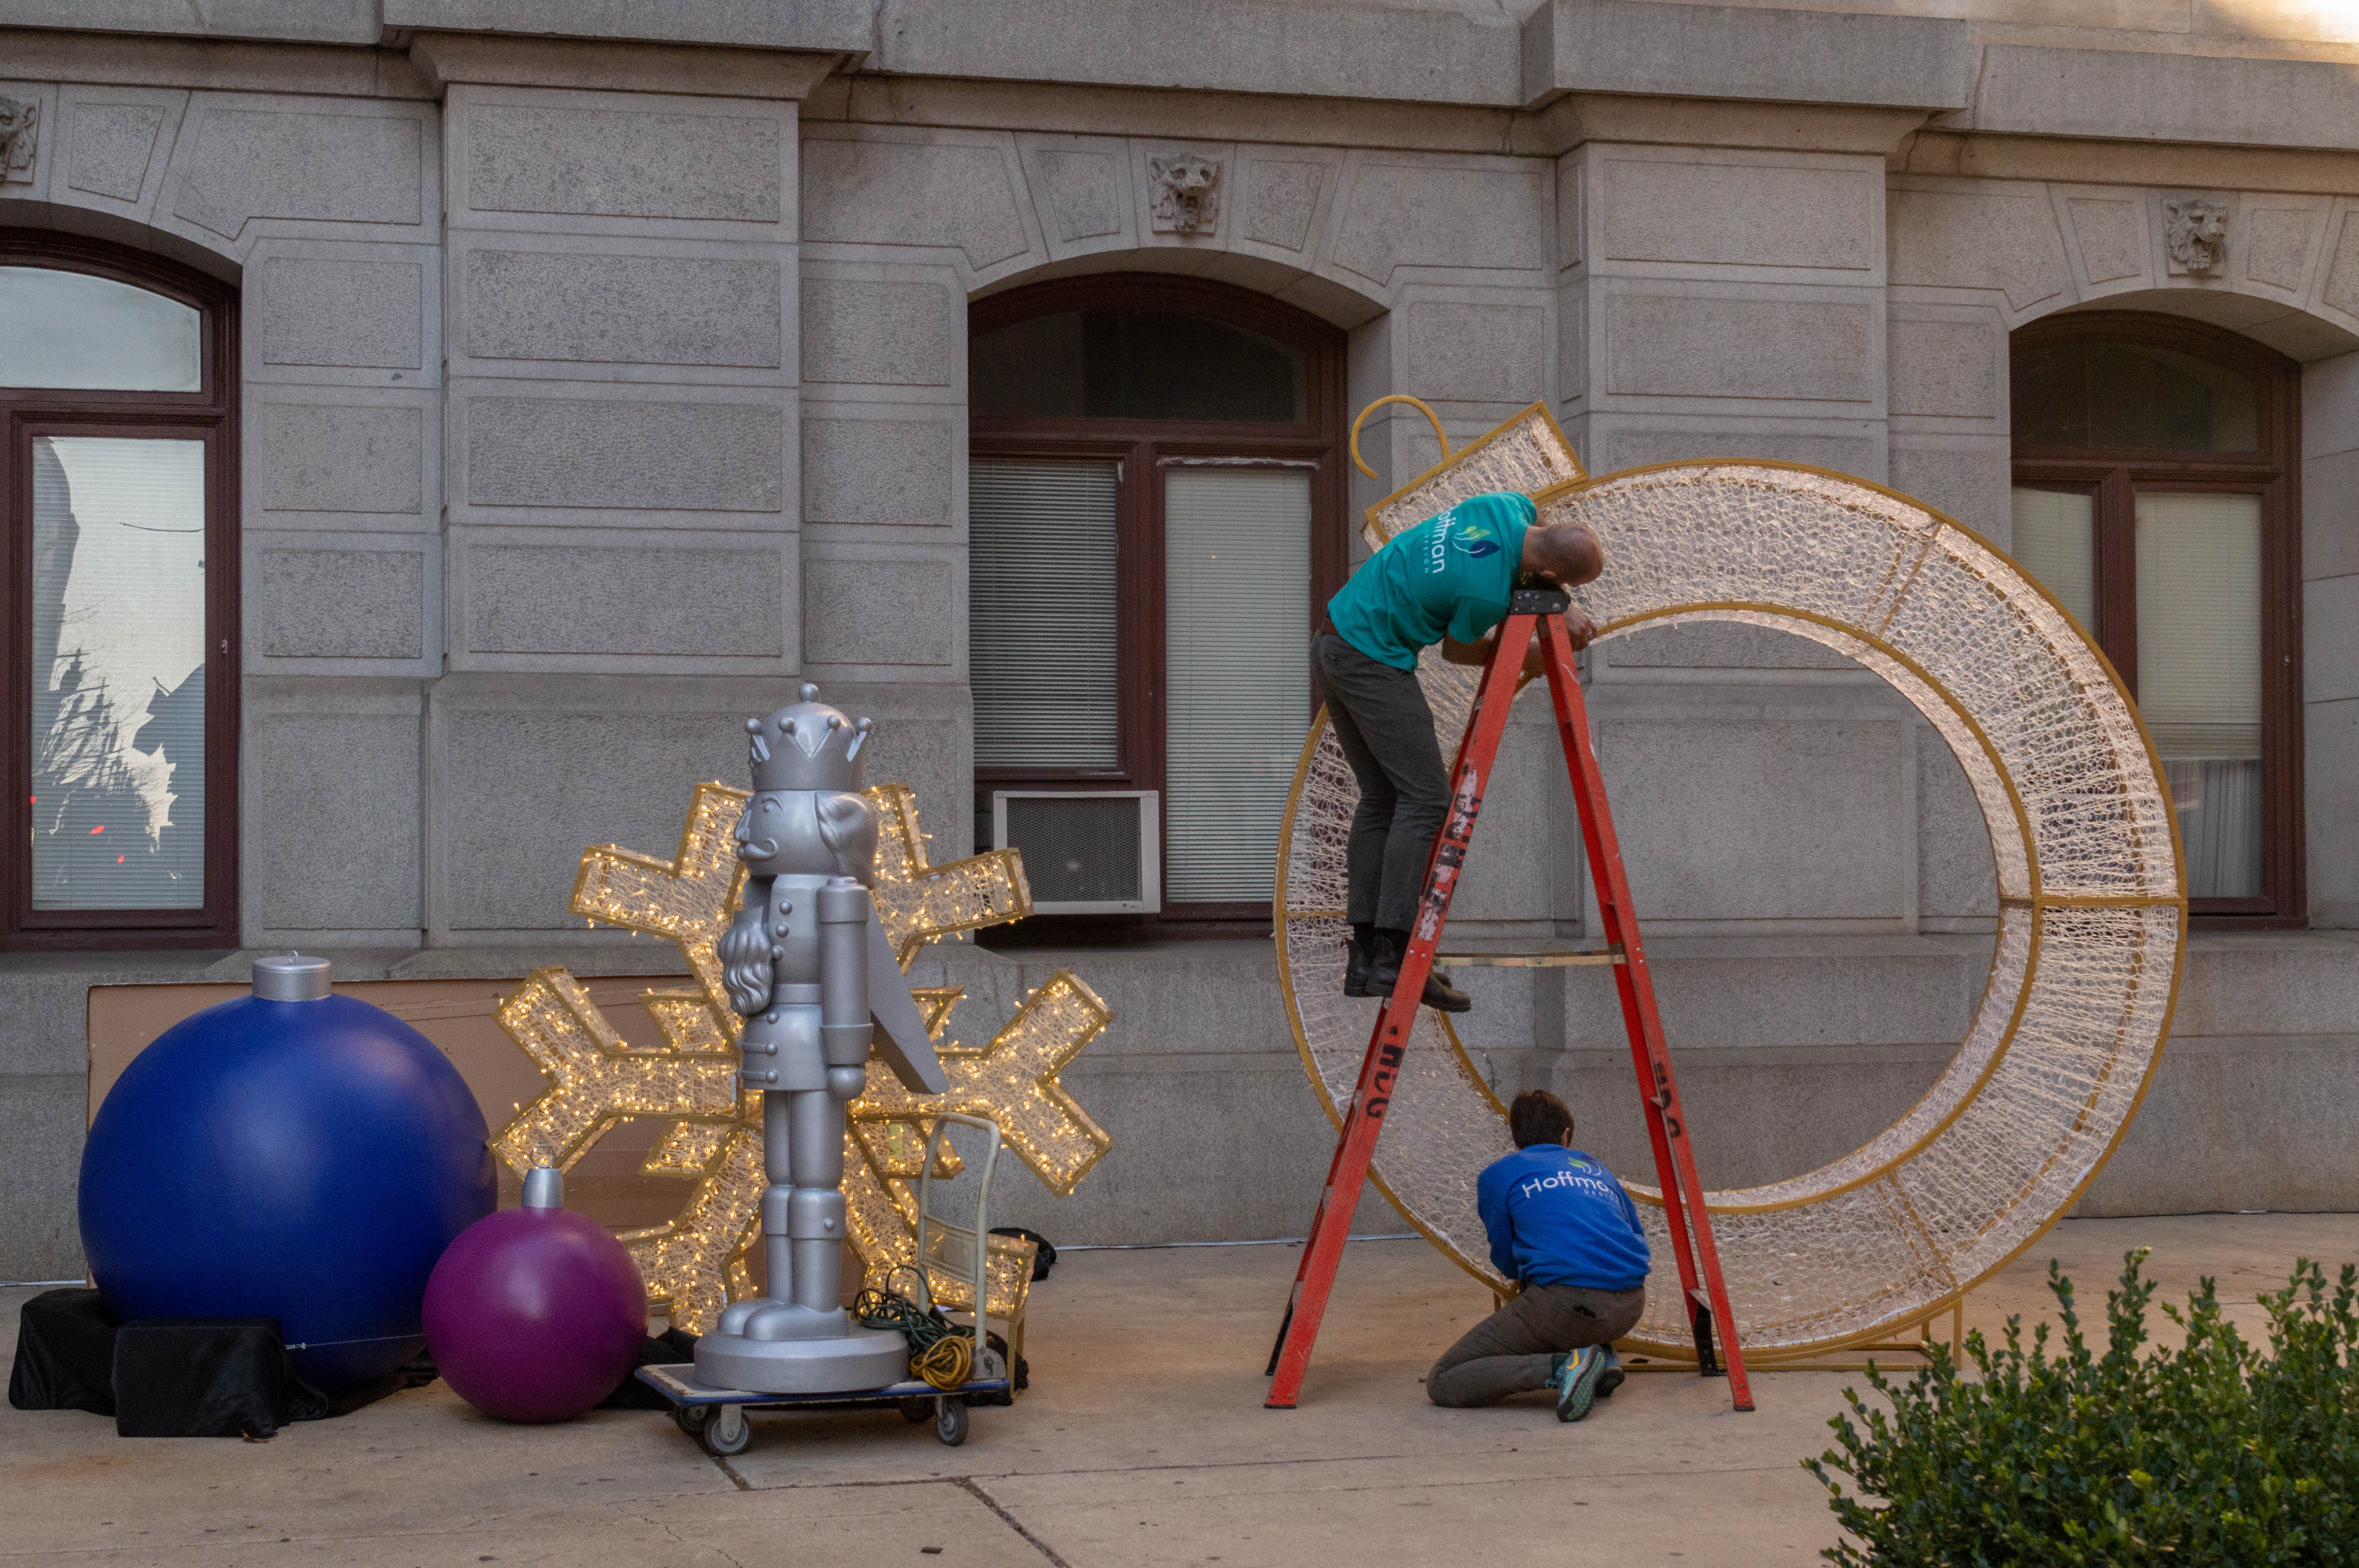 A photograph of two men setting up Christmas decorations on the sidewalk in front of a concrete building. There is a large blue Christmas tree ornament next to a large nutcracker statue in the left part of the frame. On the right, A ladder is setup, with a man crouched underneath it and a man on the top of the ladder. Both men are assembling a large circular decoration.